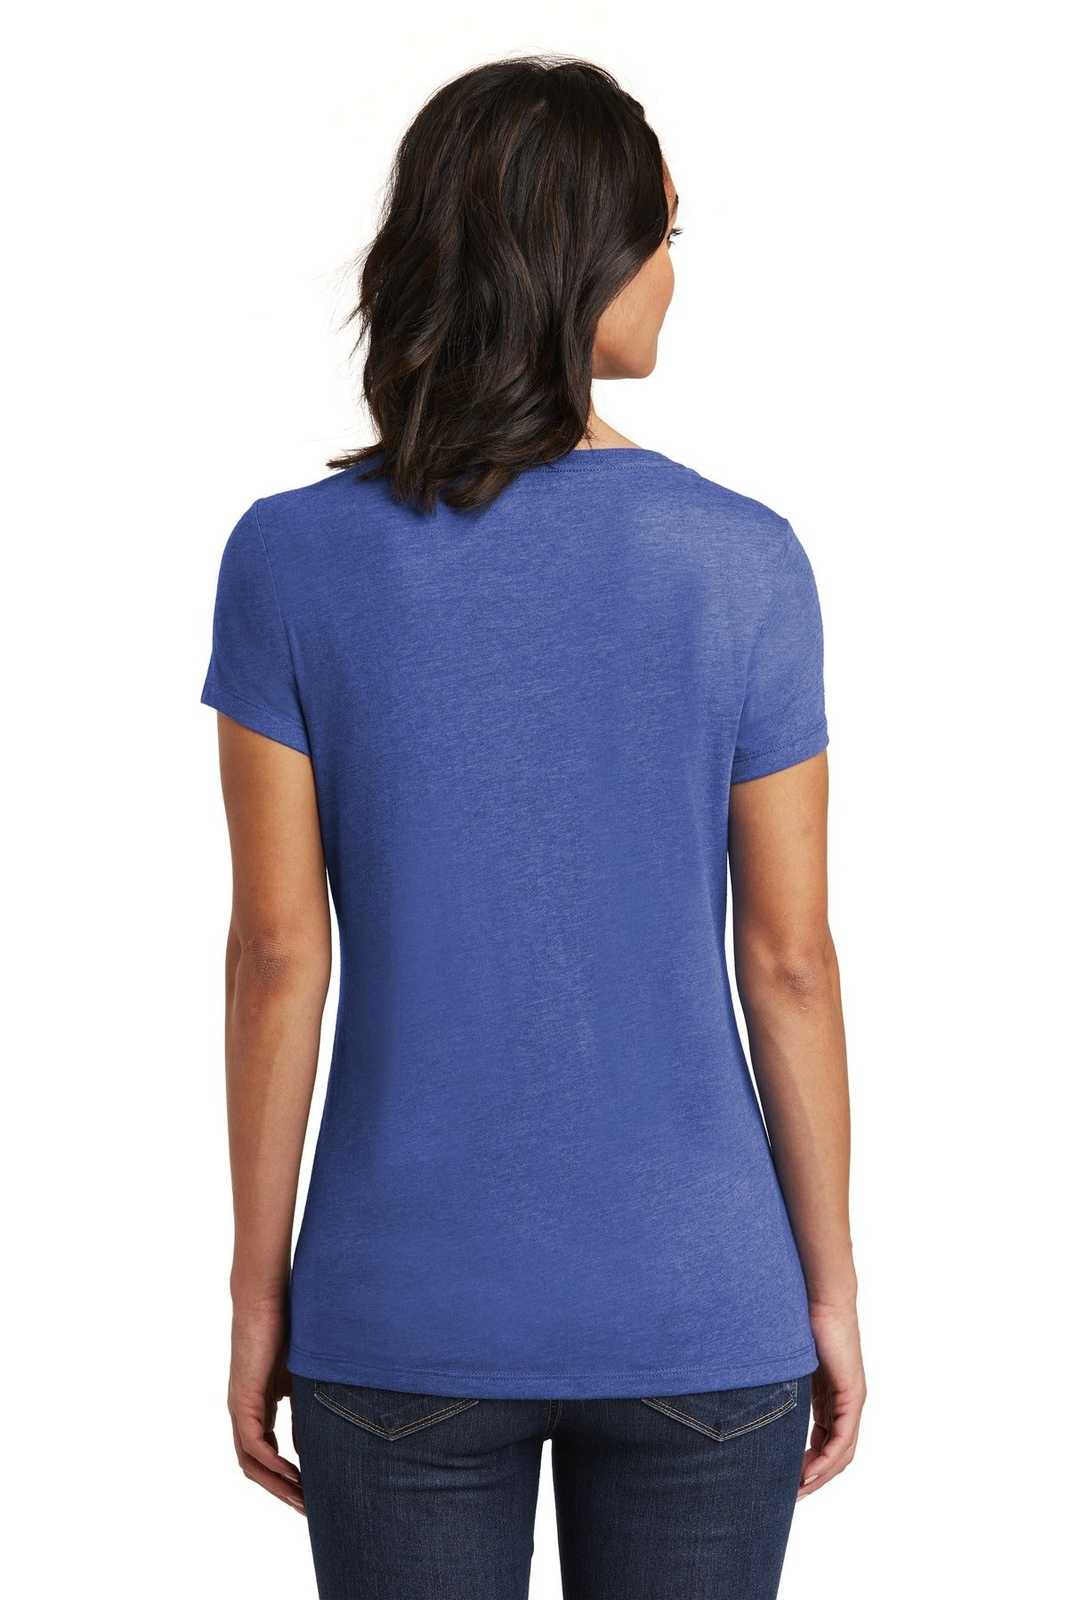 District DT6503 Women's Very Important Tee V-Neck - Royal Frost - HIT a Double - 1